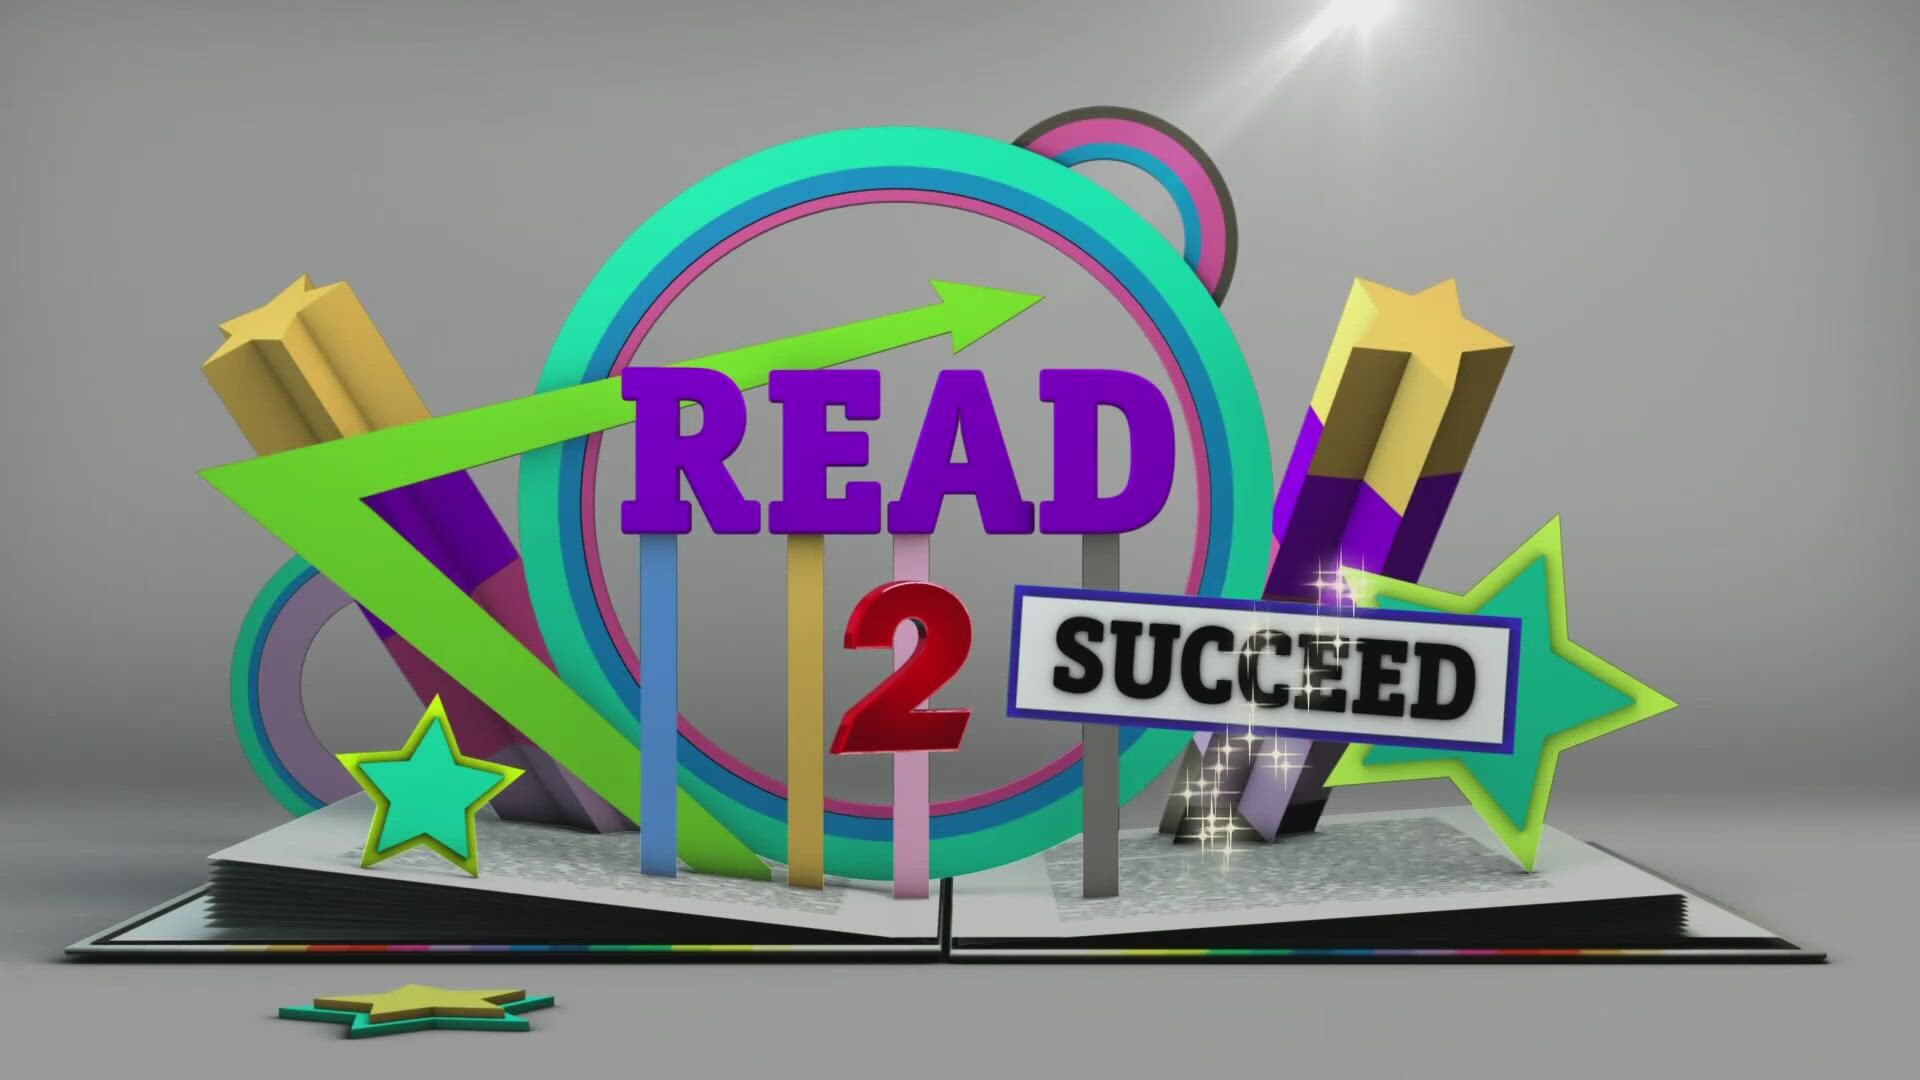 Read 2 Succeed was paused for two years due to COVID-19. We're back to spread the excitement about reading!